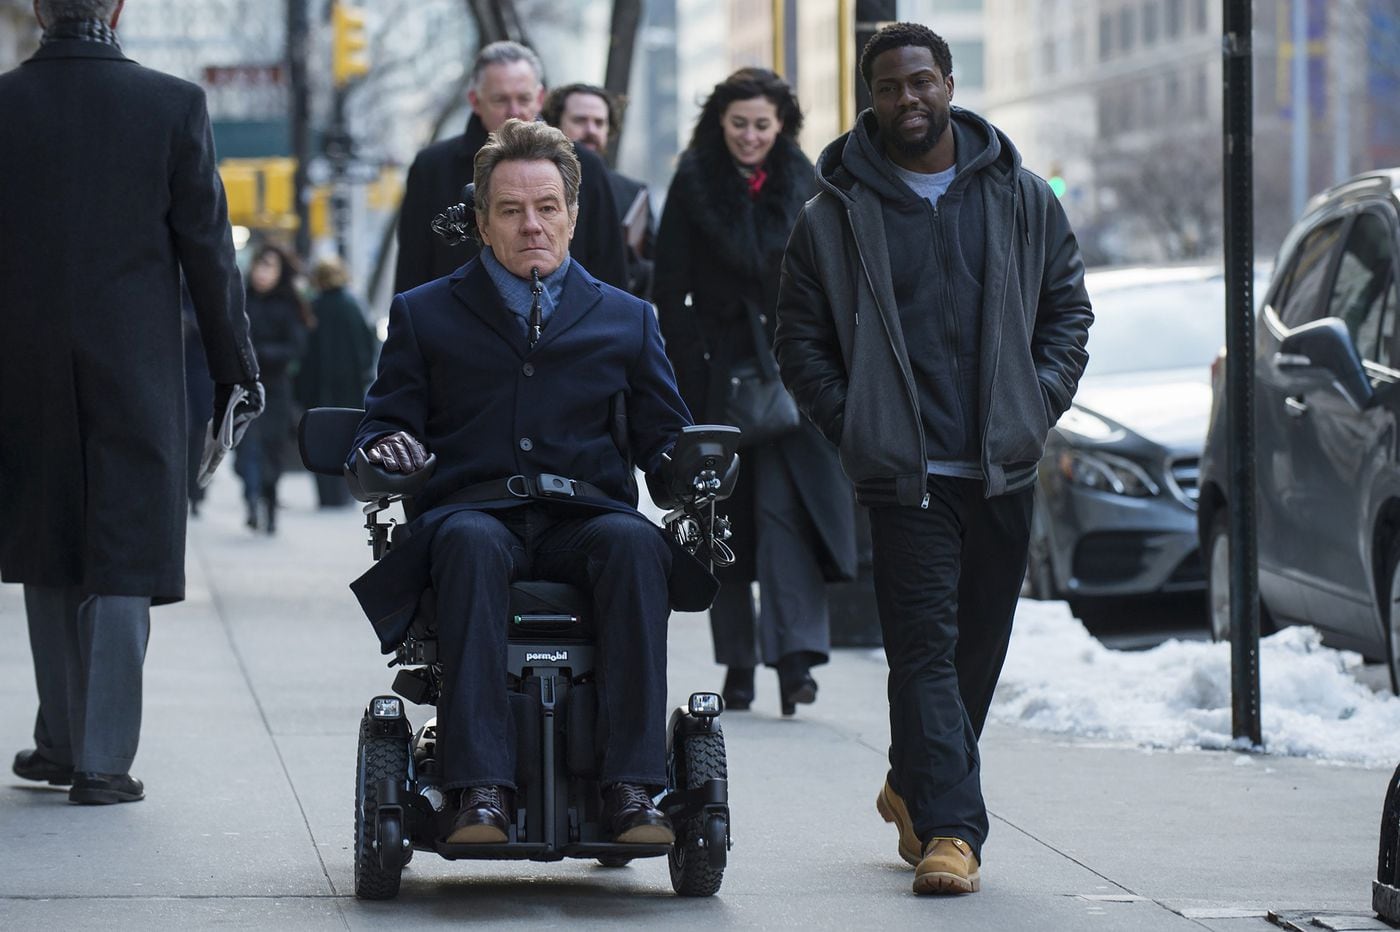 15 HQ Images The Upside Movie Apartment : How Accurate Is The Upside The True Story Of Philippe Pozzo Di Borgo